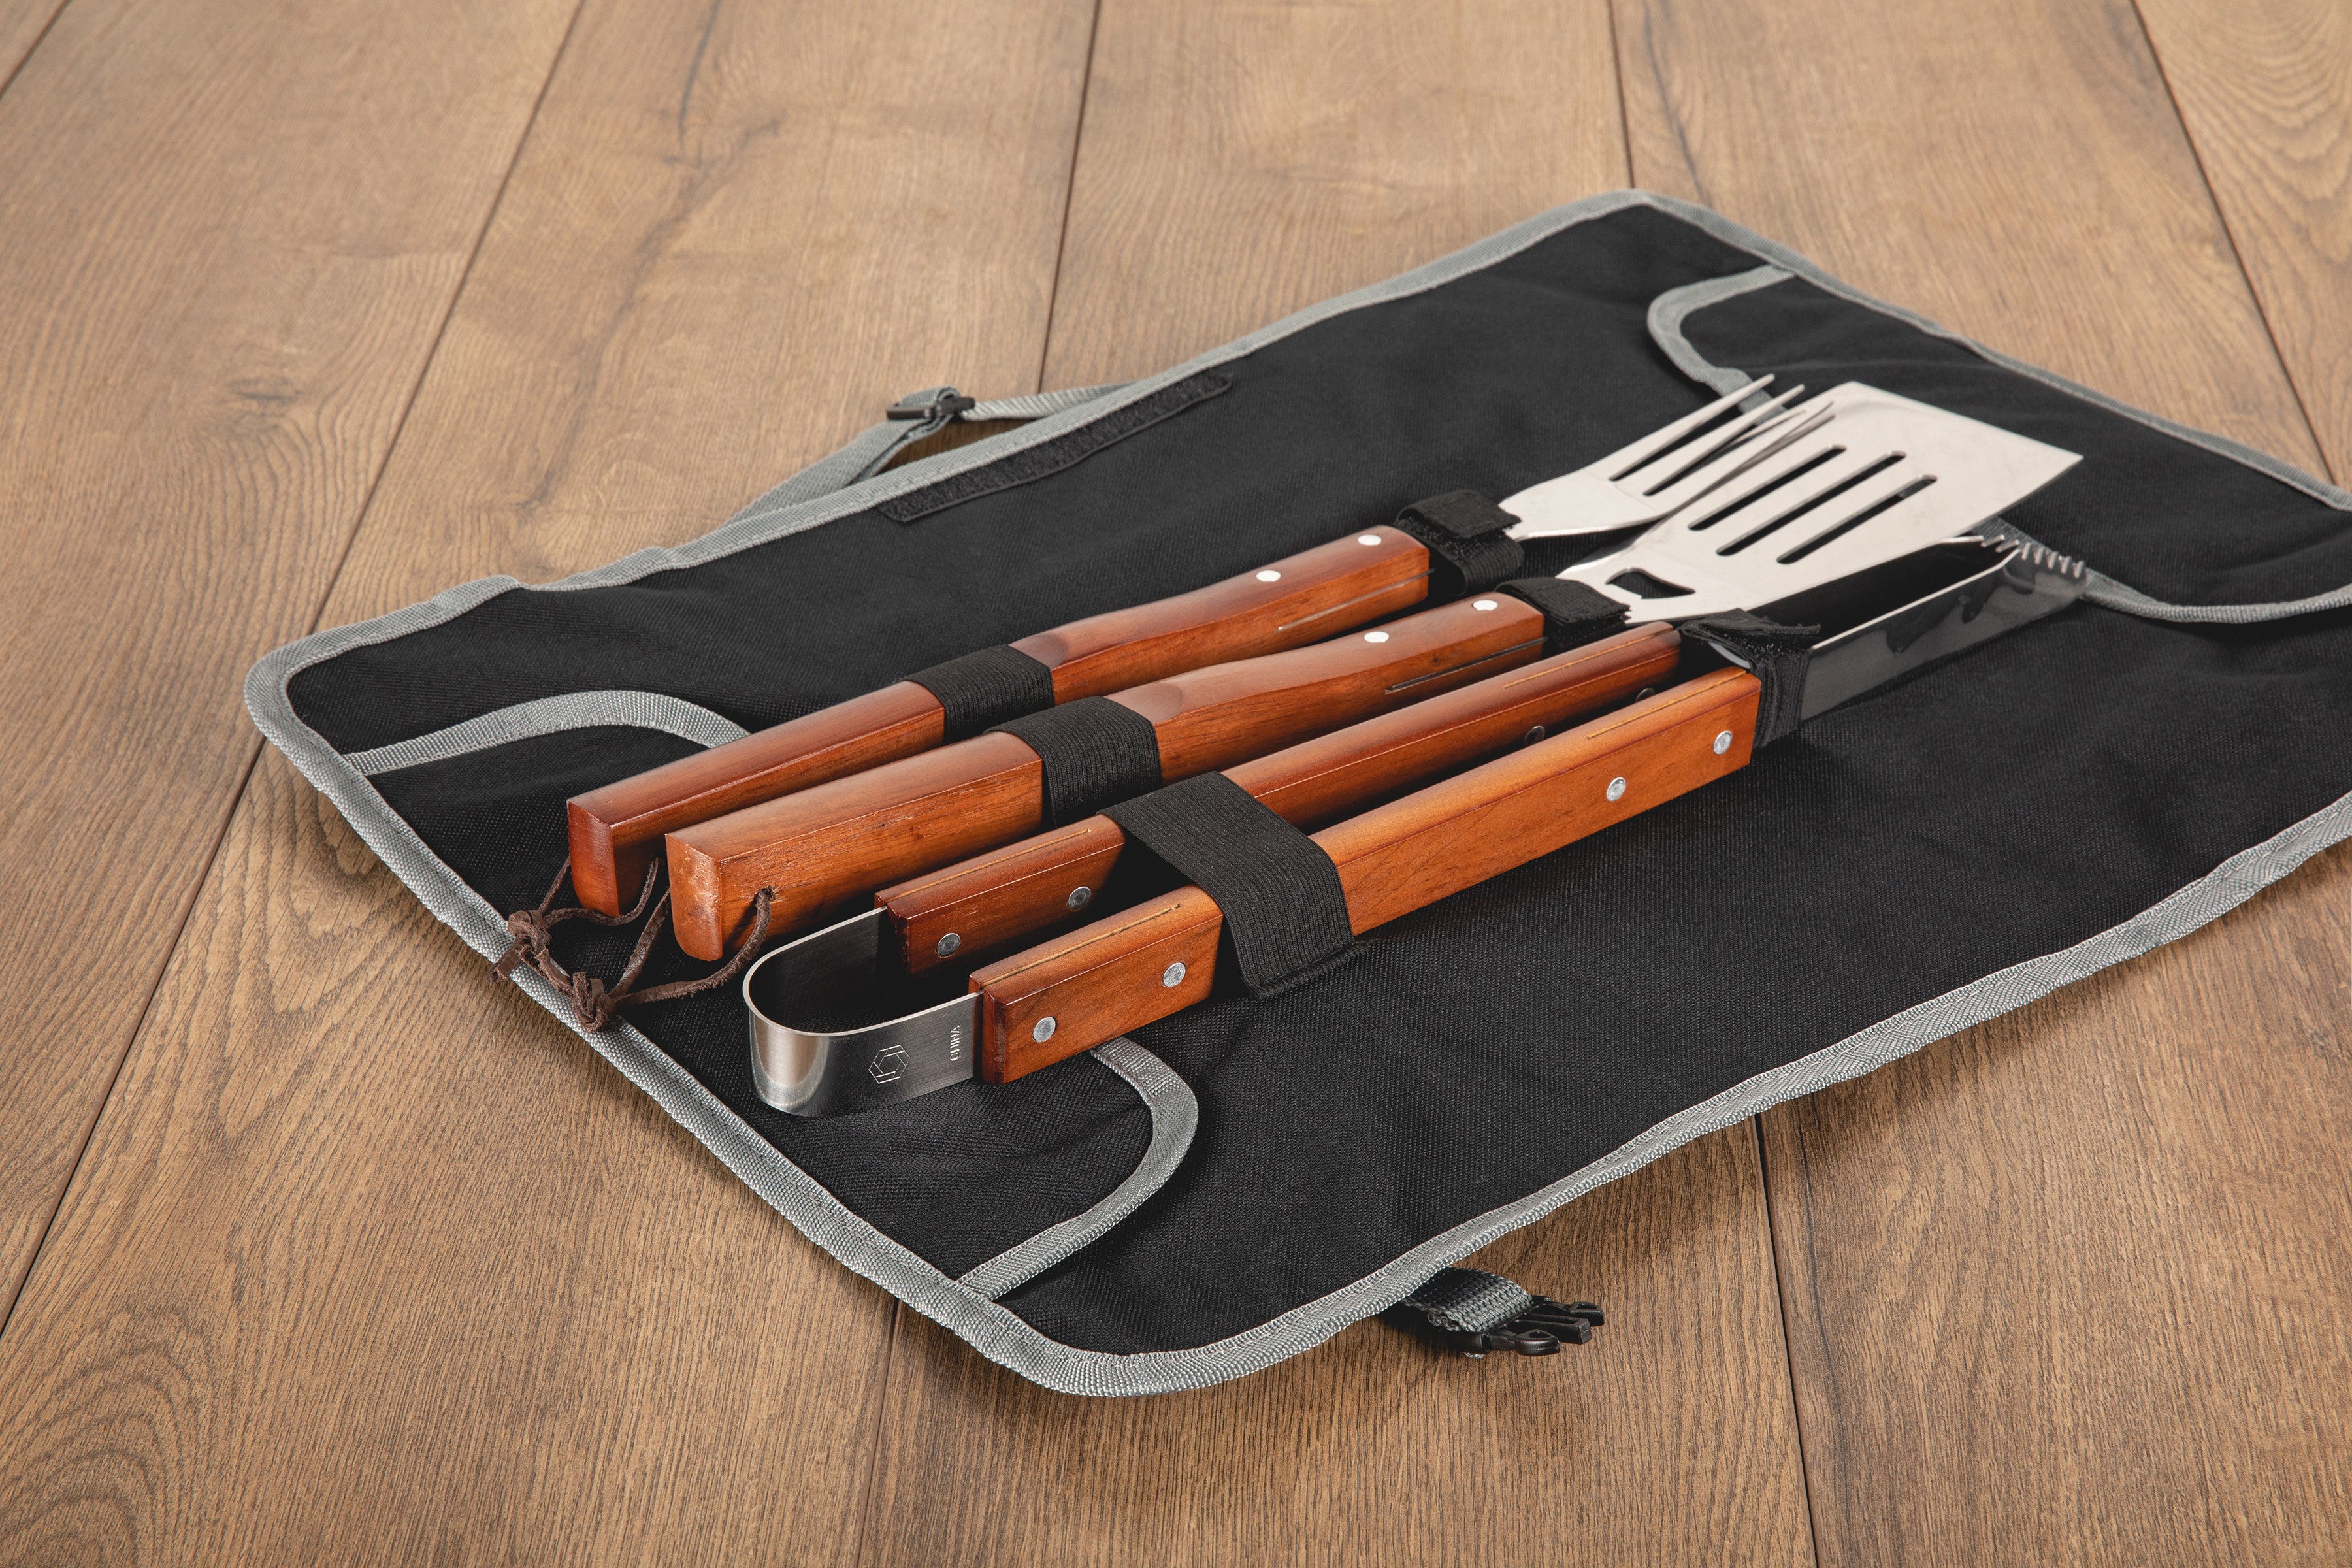 Stanford Cardinal - 3-Piece BBQ Tote & Grill Set